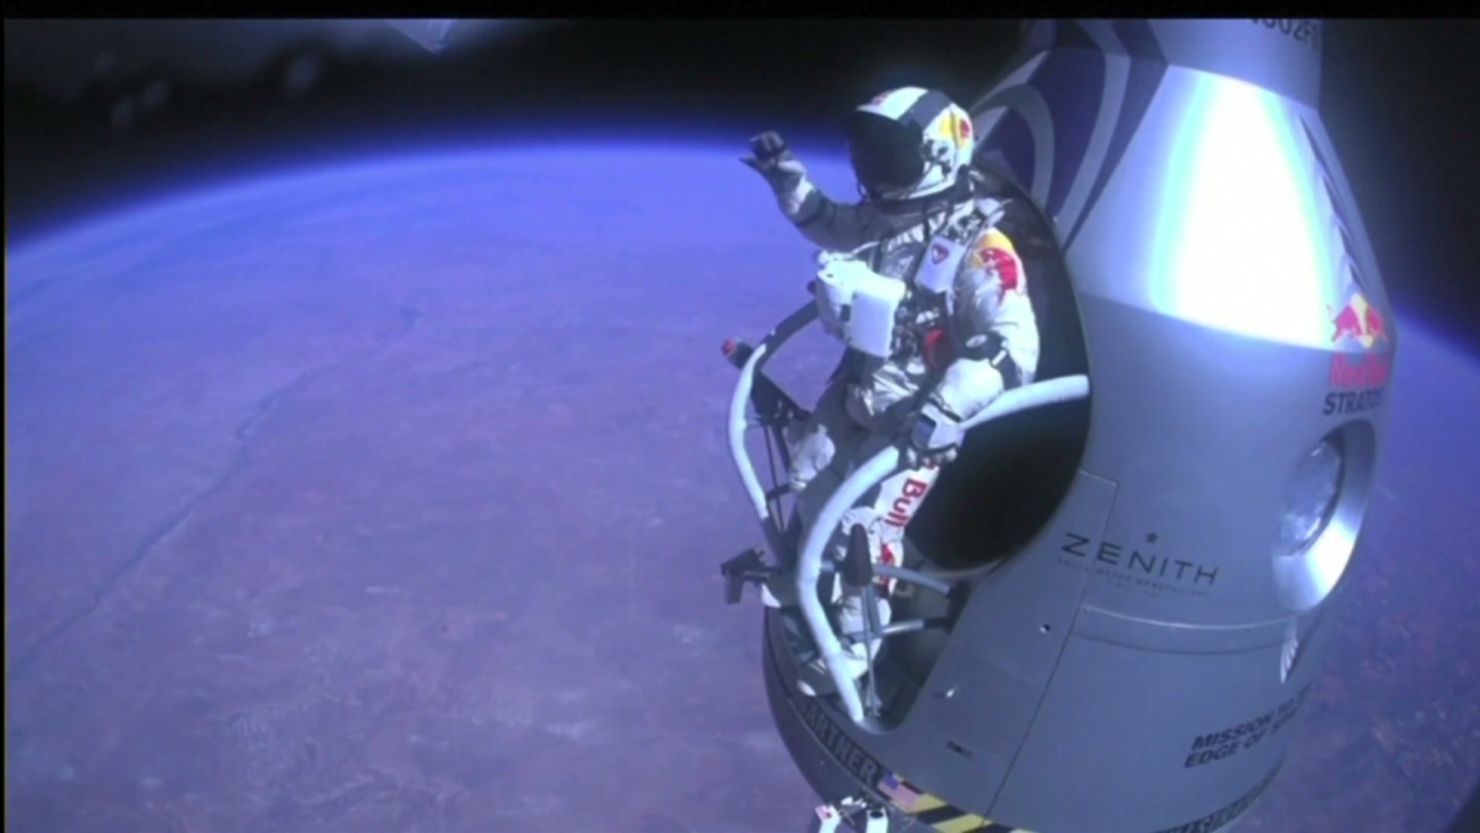 Felix Baumgartner's daring freefall from near space was a top trend on Google.